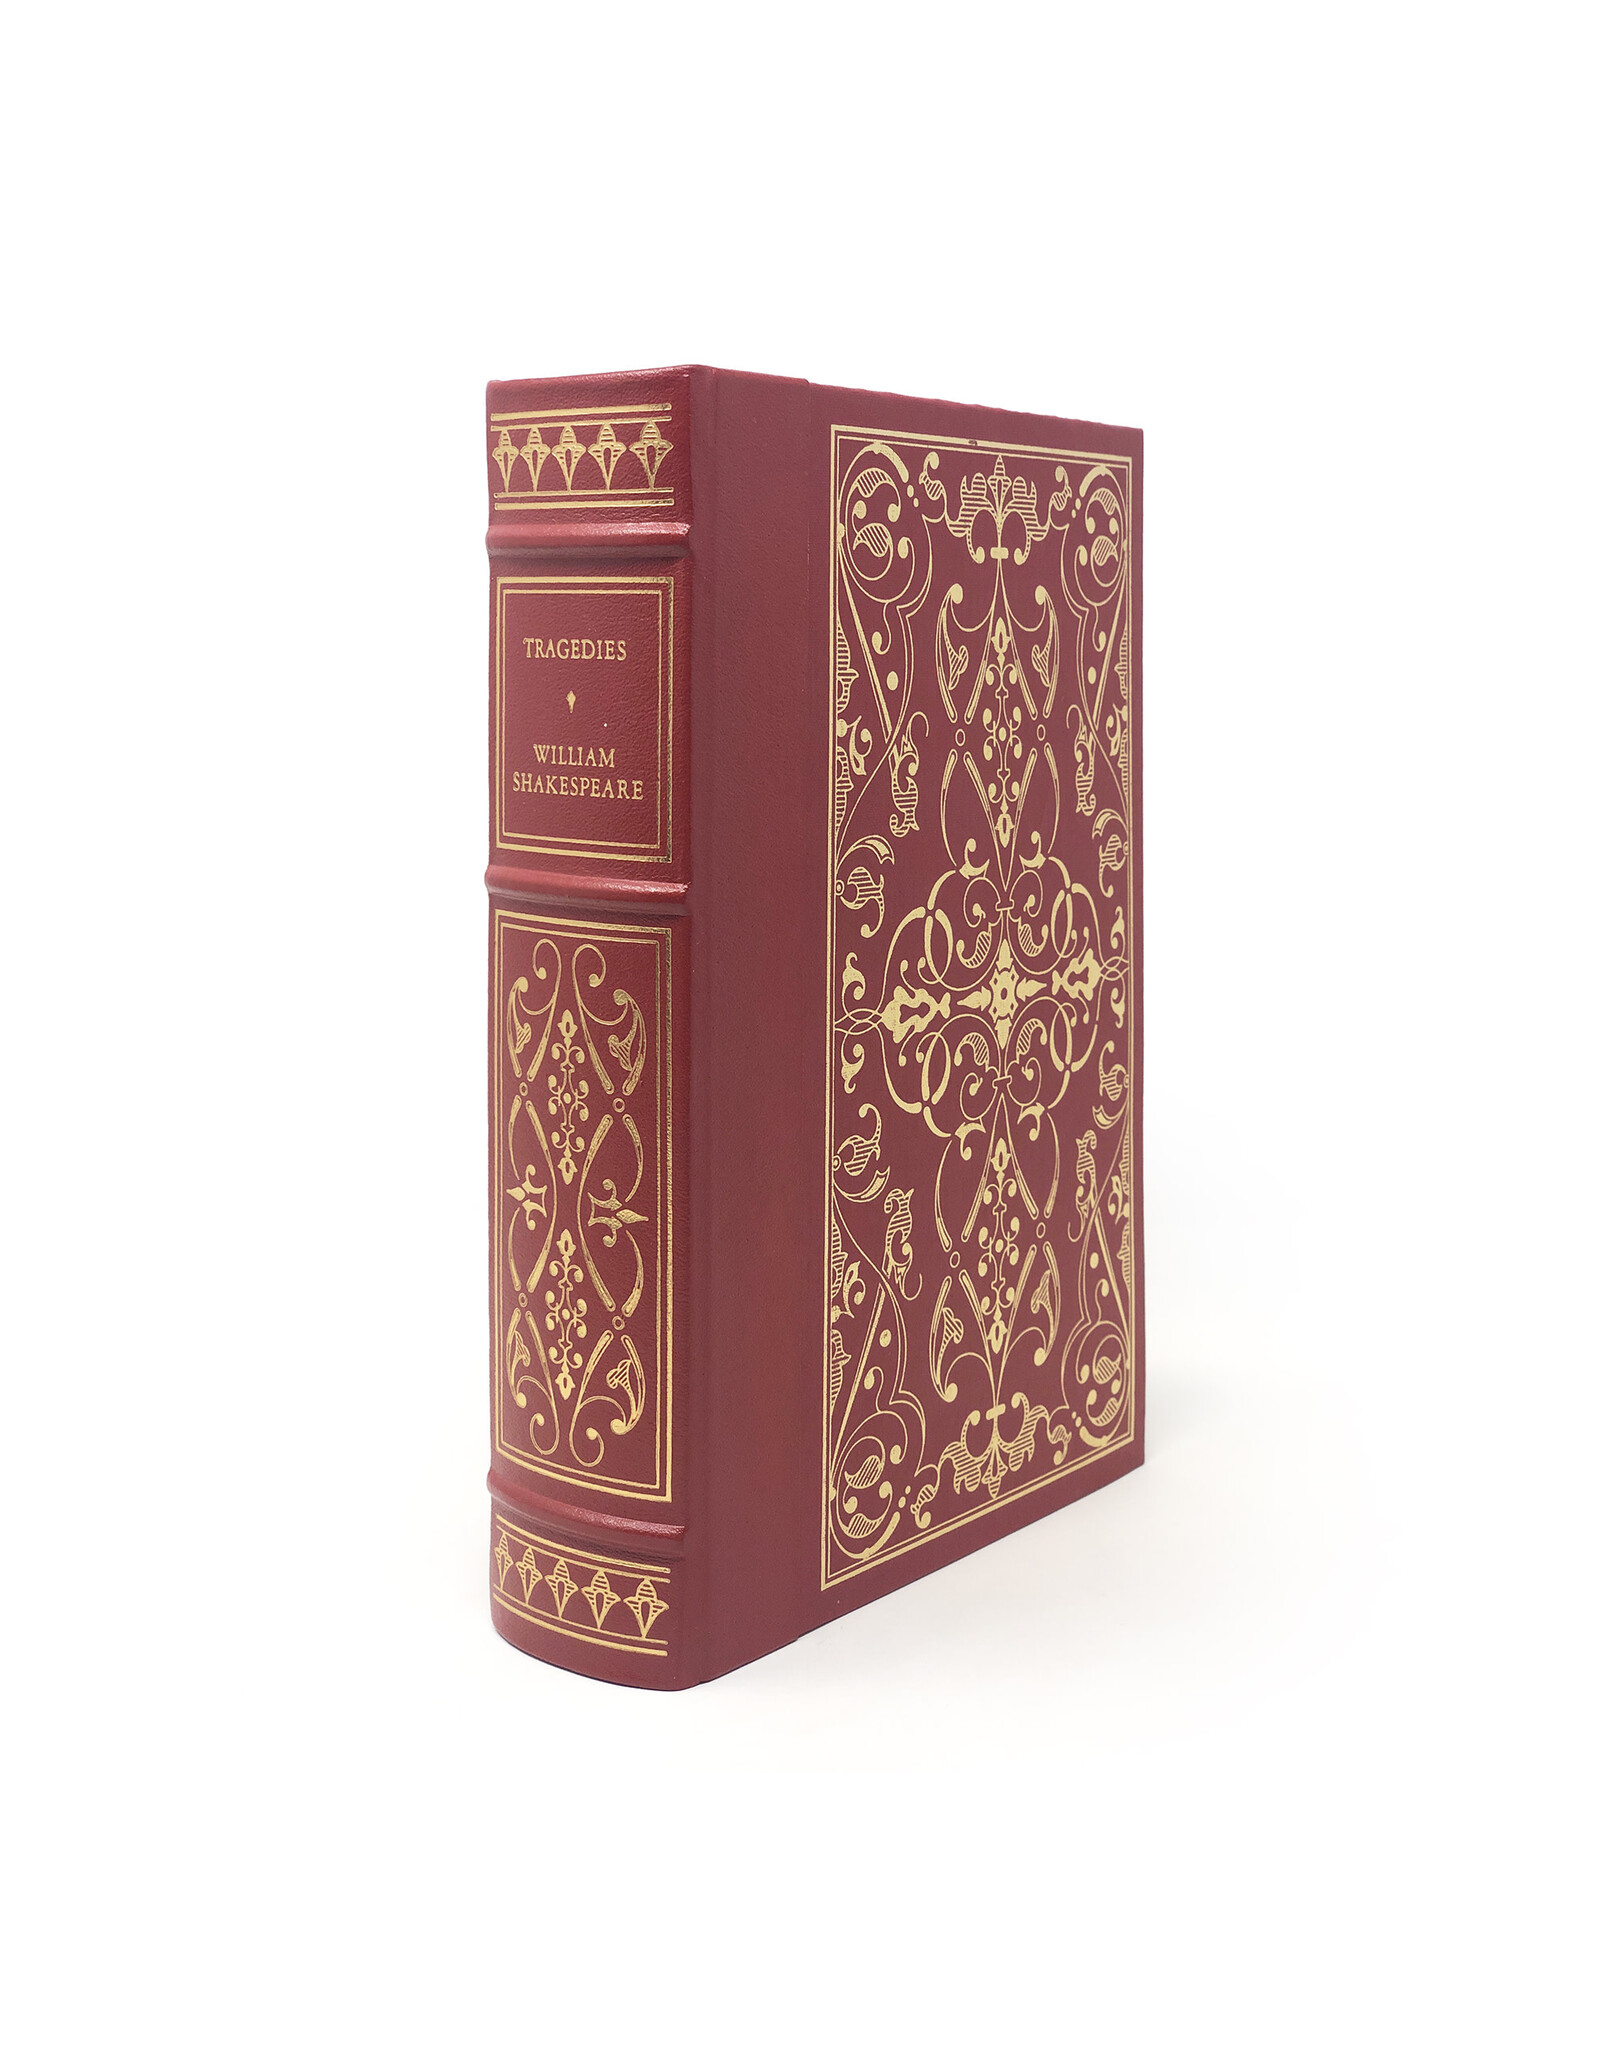 Franklin Library Greatest Tragedies of William Shakespeare Oxford Library of the World's Greatest Books Quarter Leather